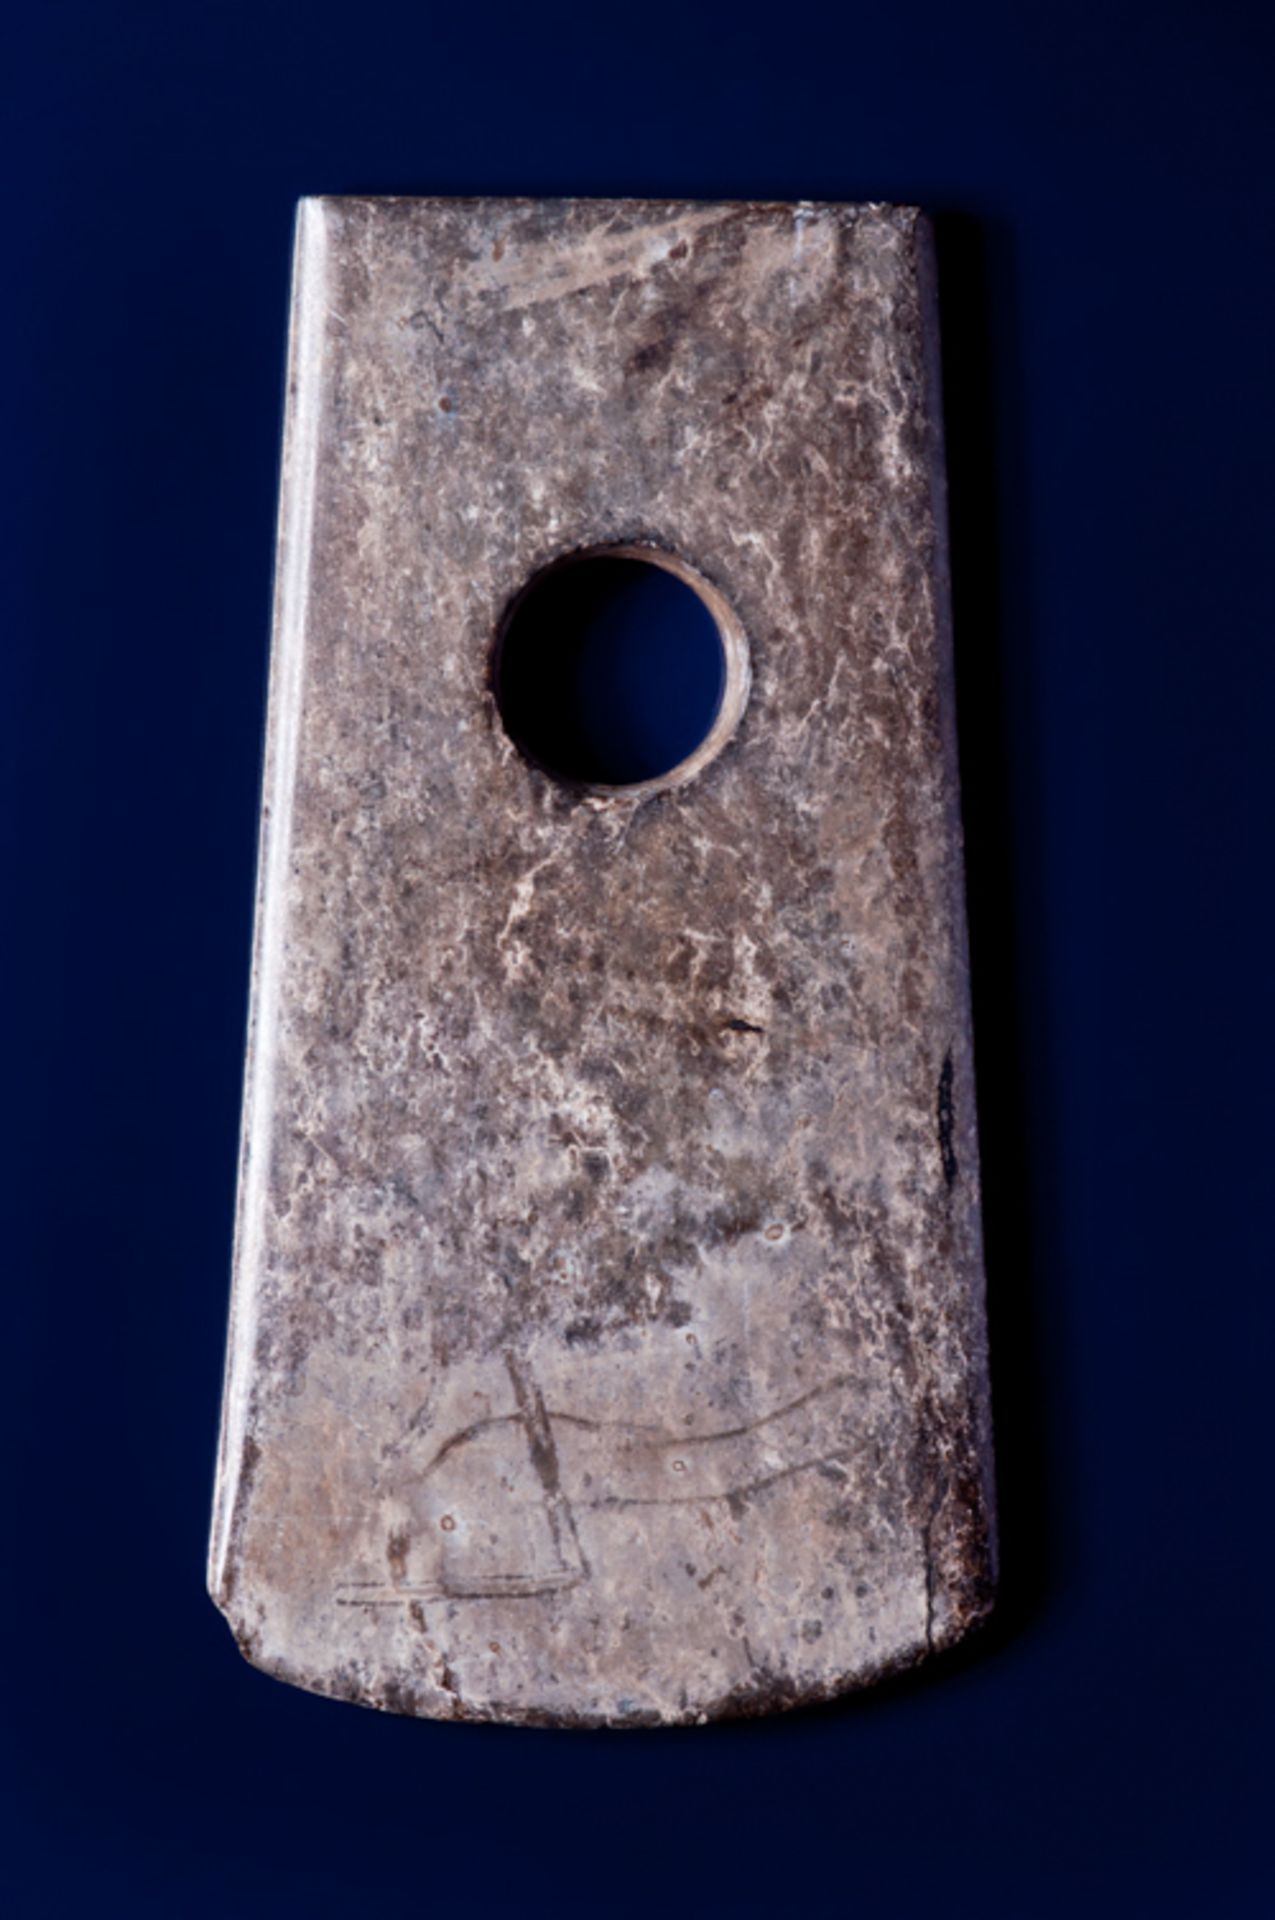 AXE Jade. China, Late Neolithic period, c.2500-2000 BC This axe has a rectangular profile with - Image 2 of 4